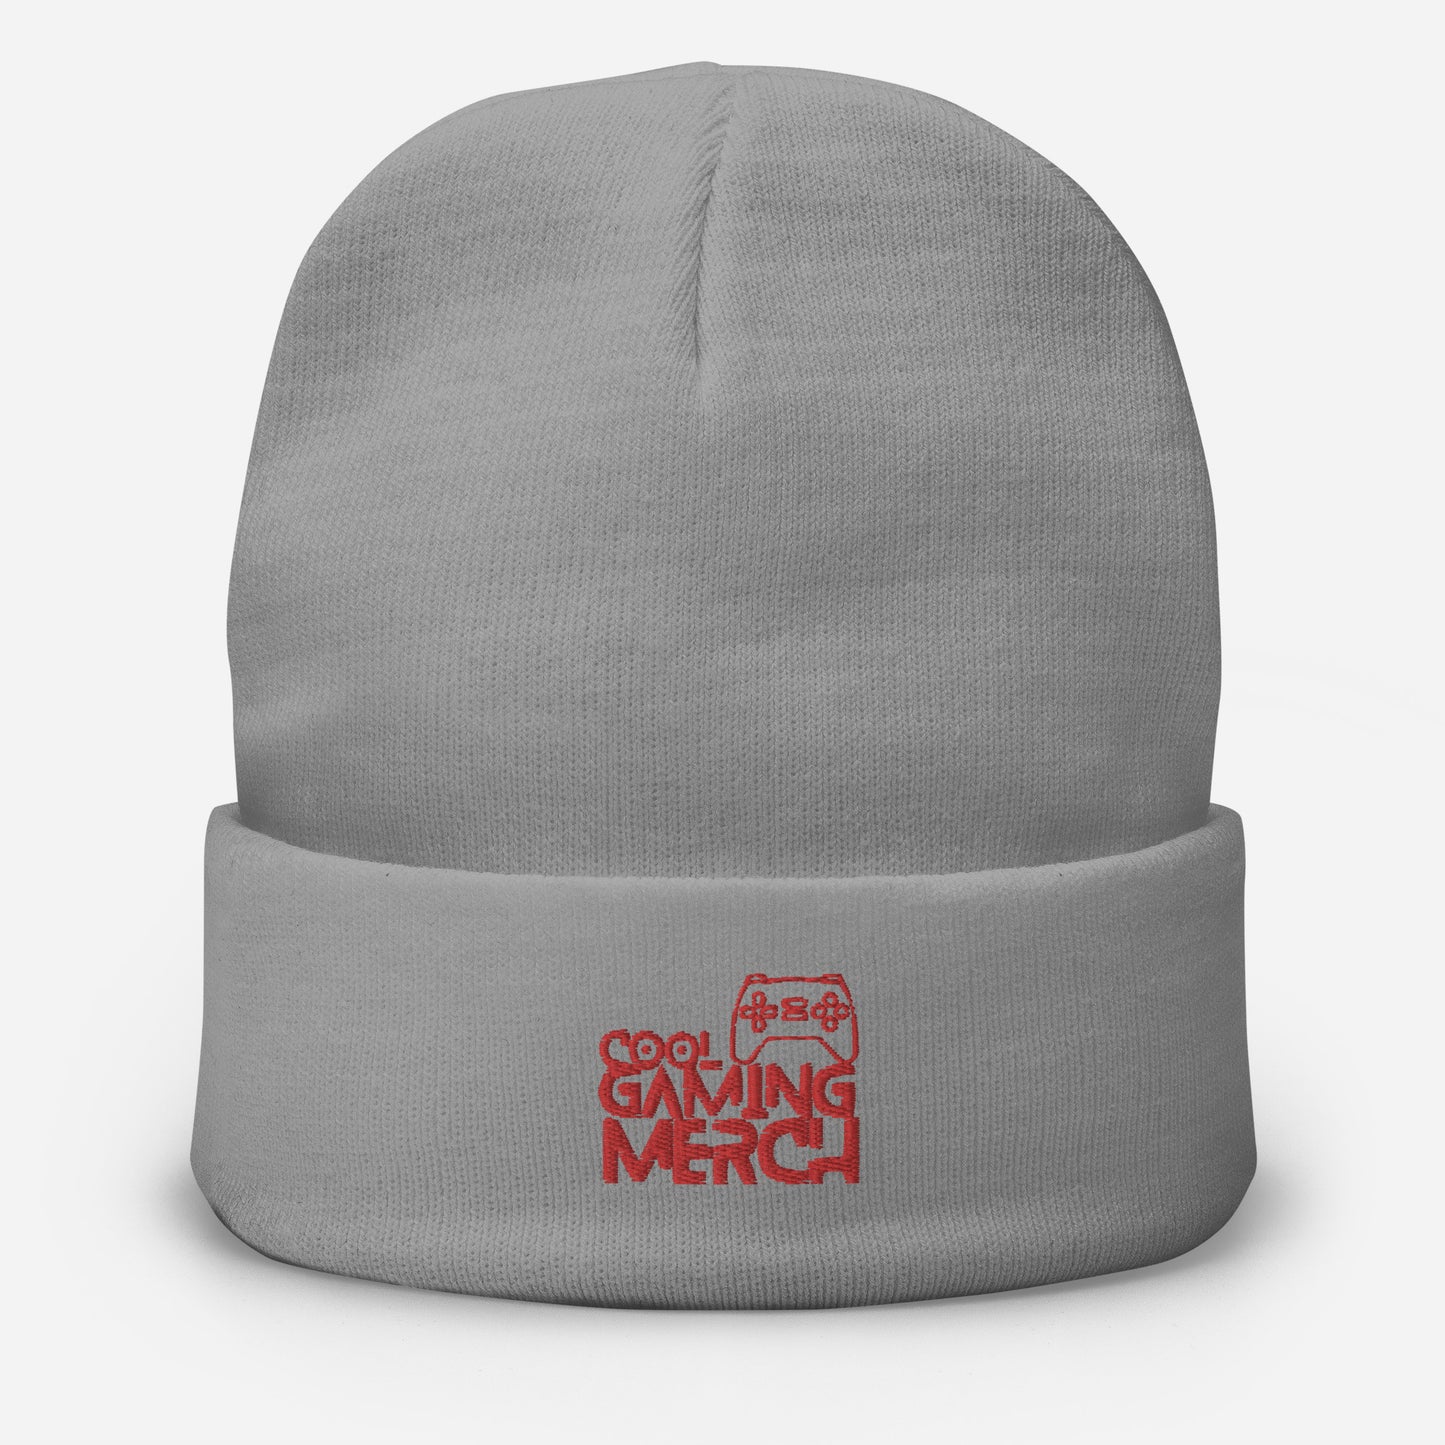 Grey beanie hat with cool gaming merch logo